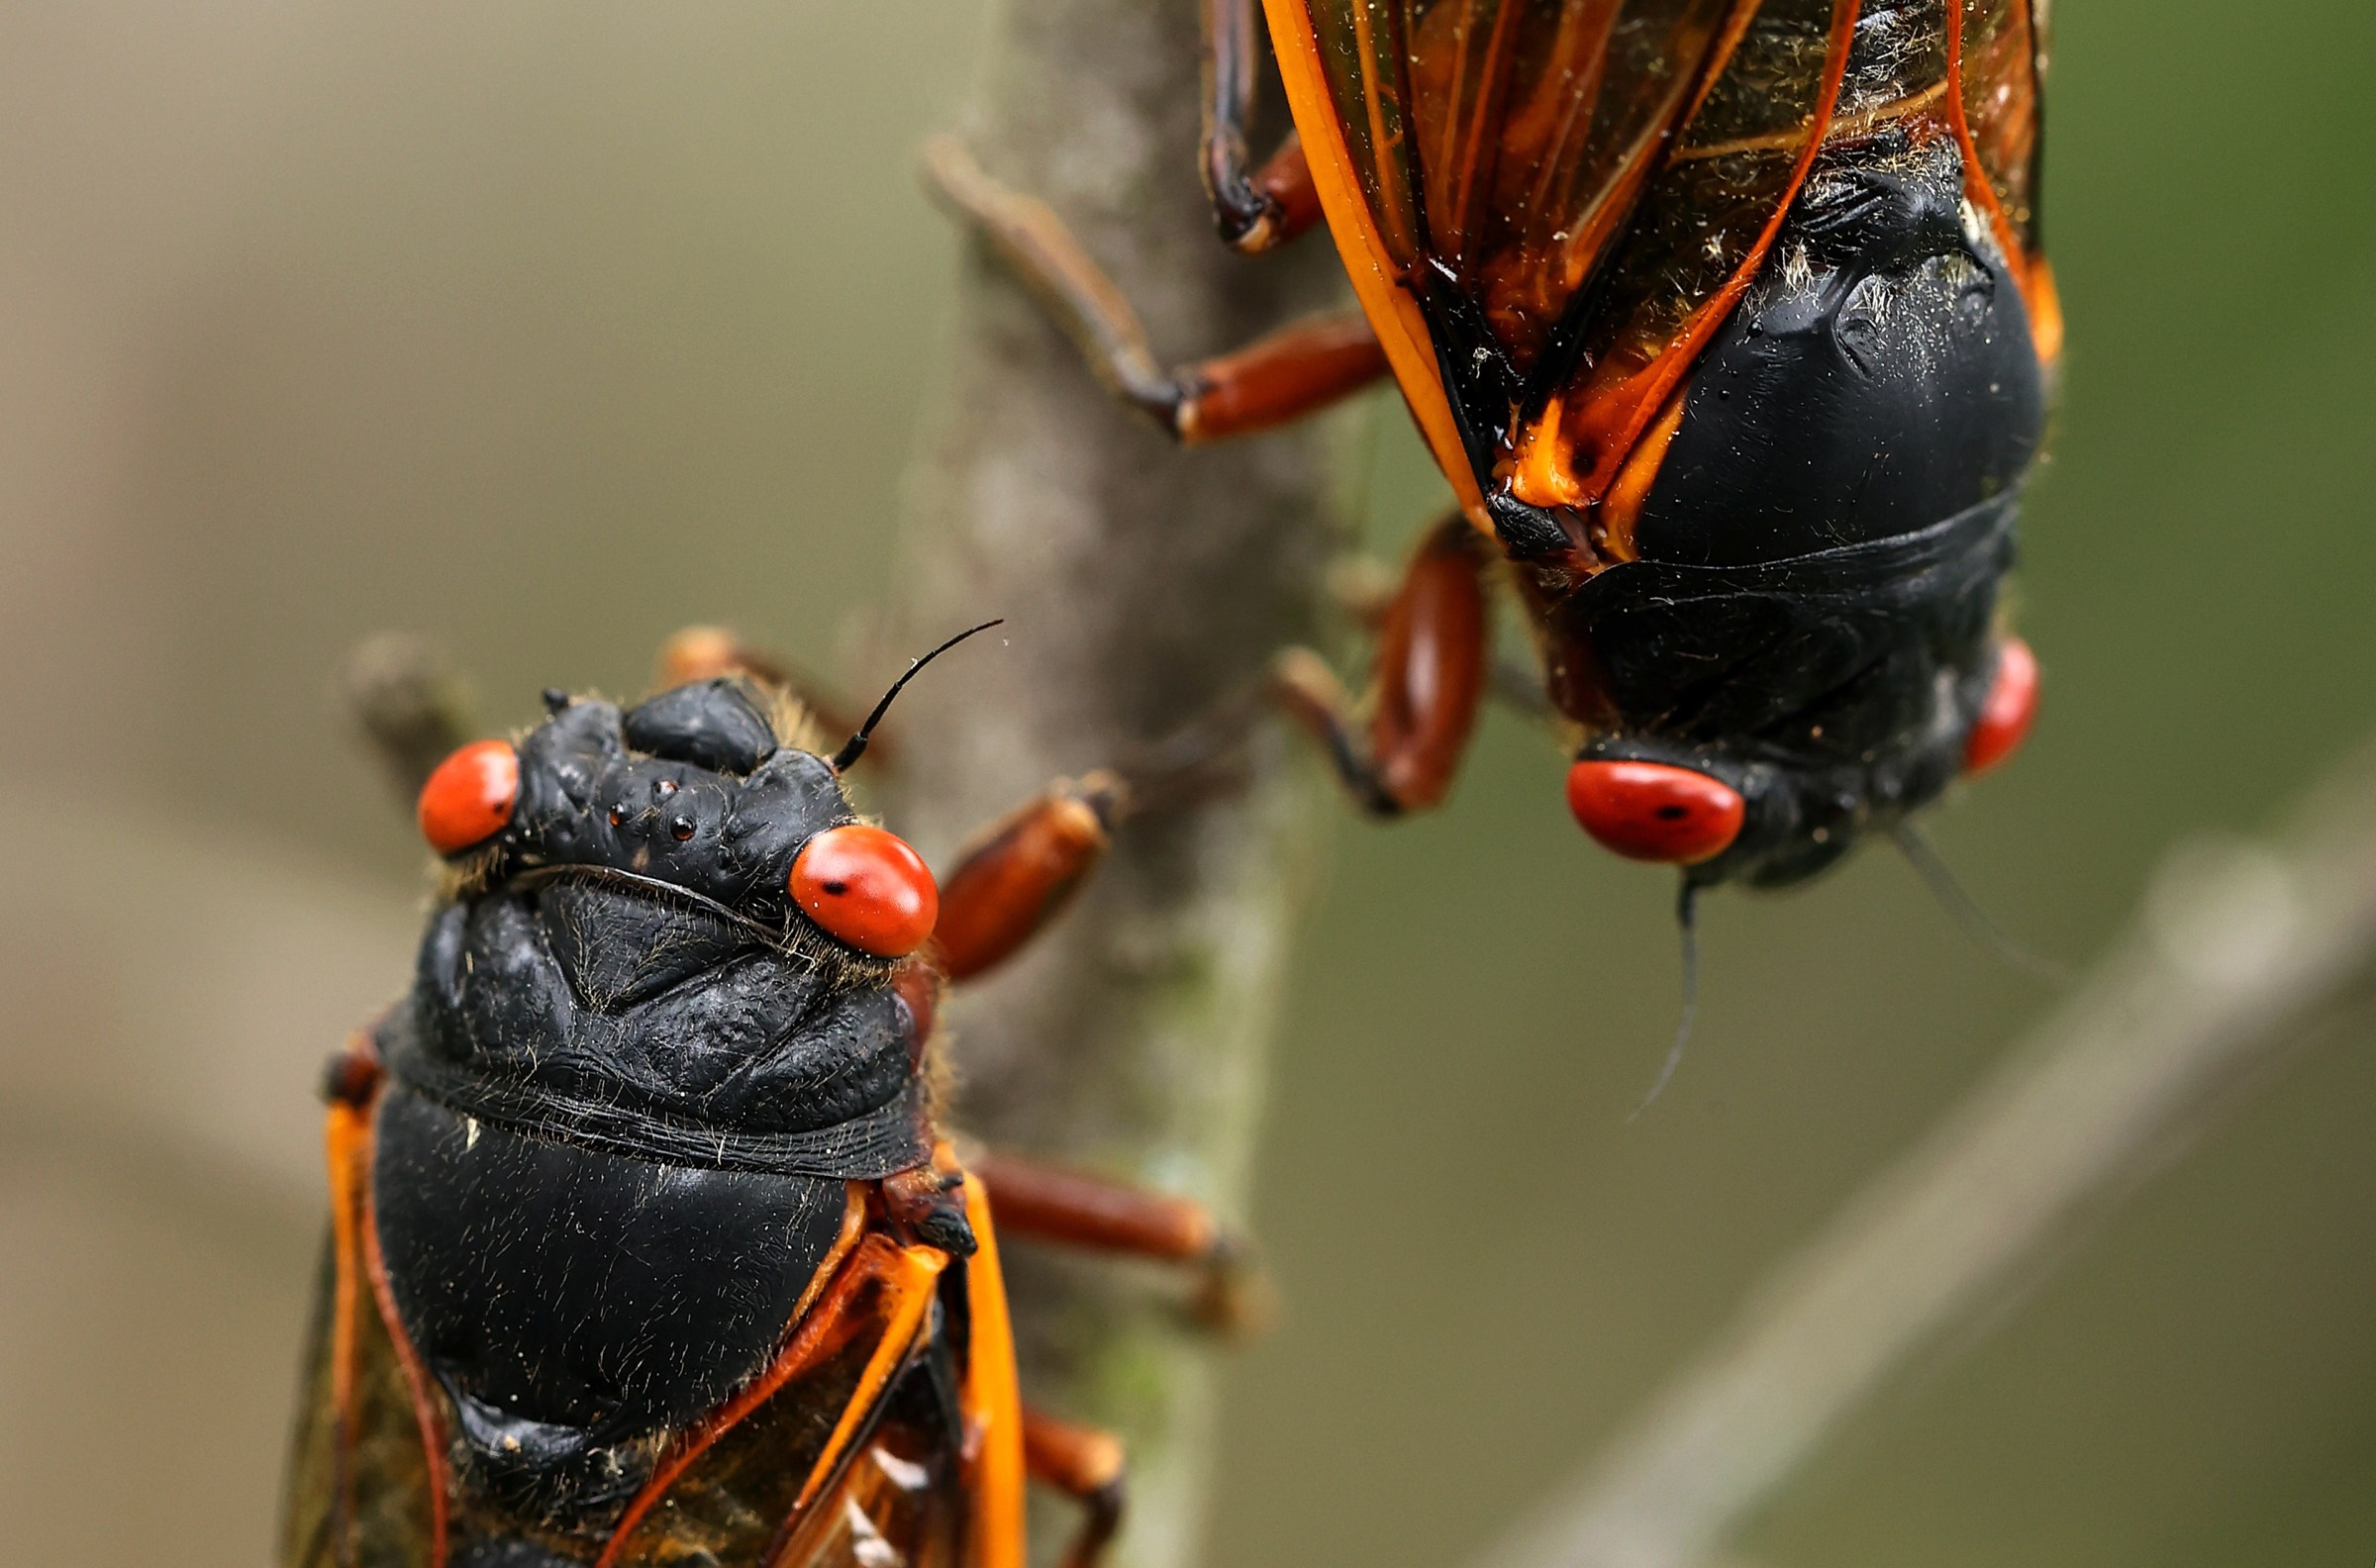 A rare burst of billions of cicadas will rewire our ecosystems for years to come